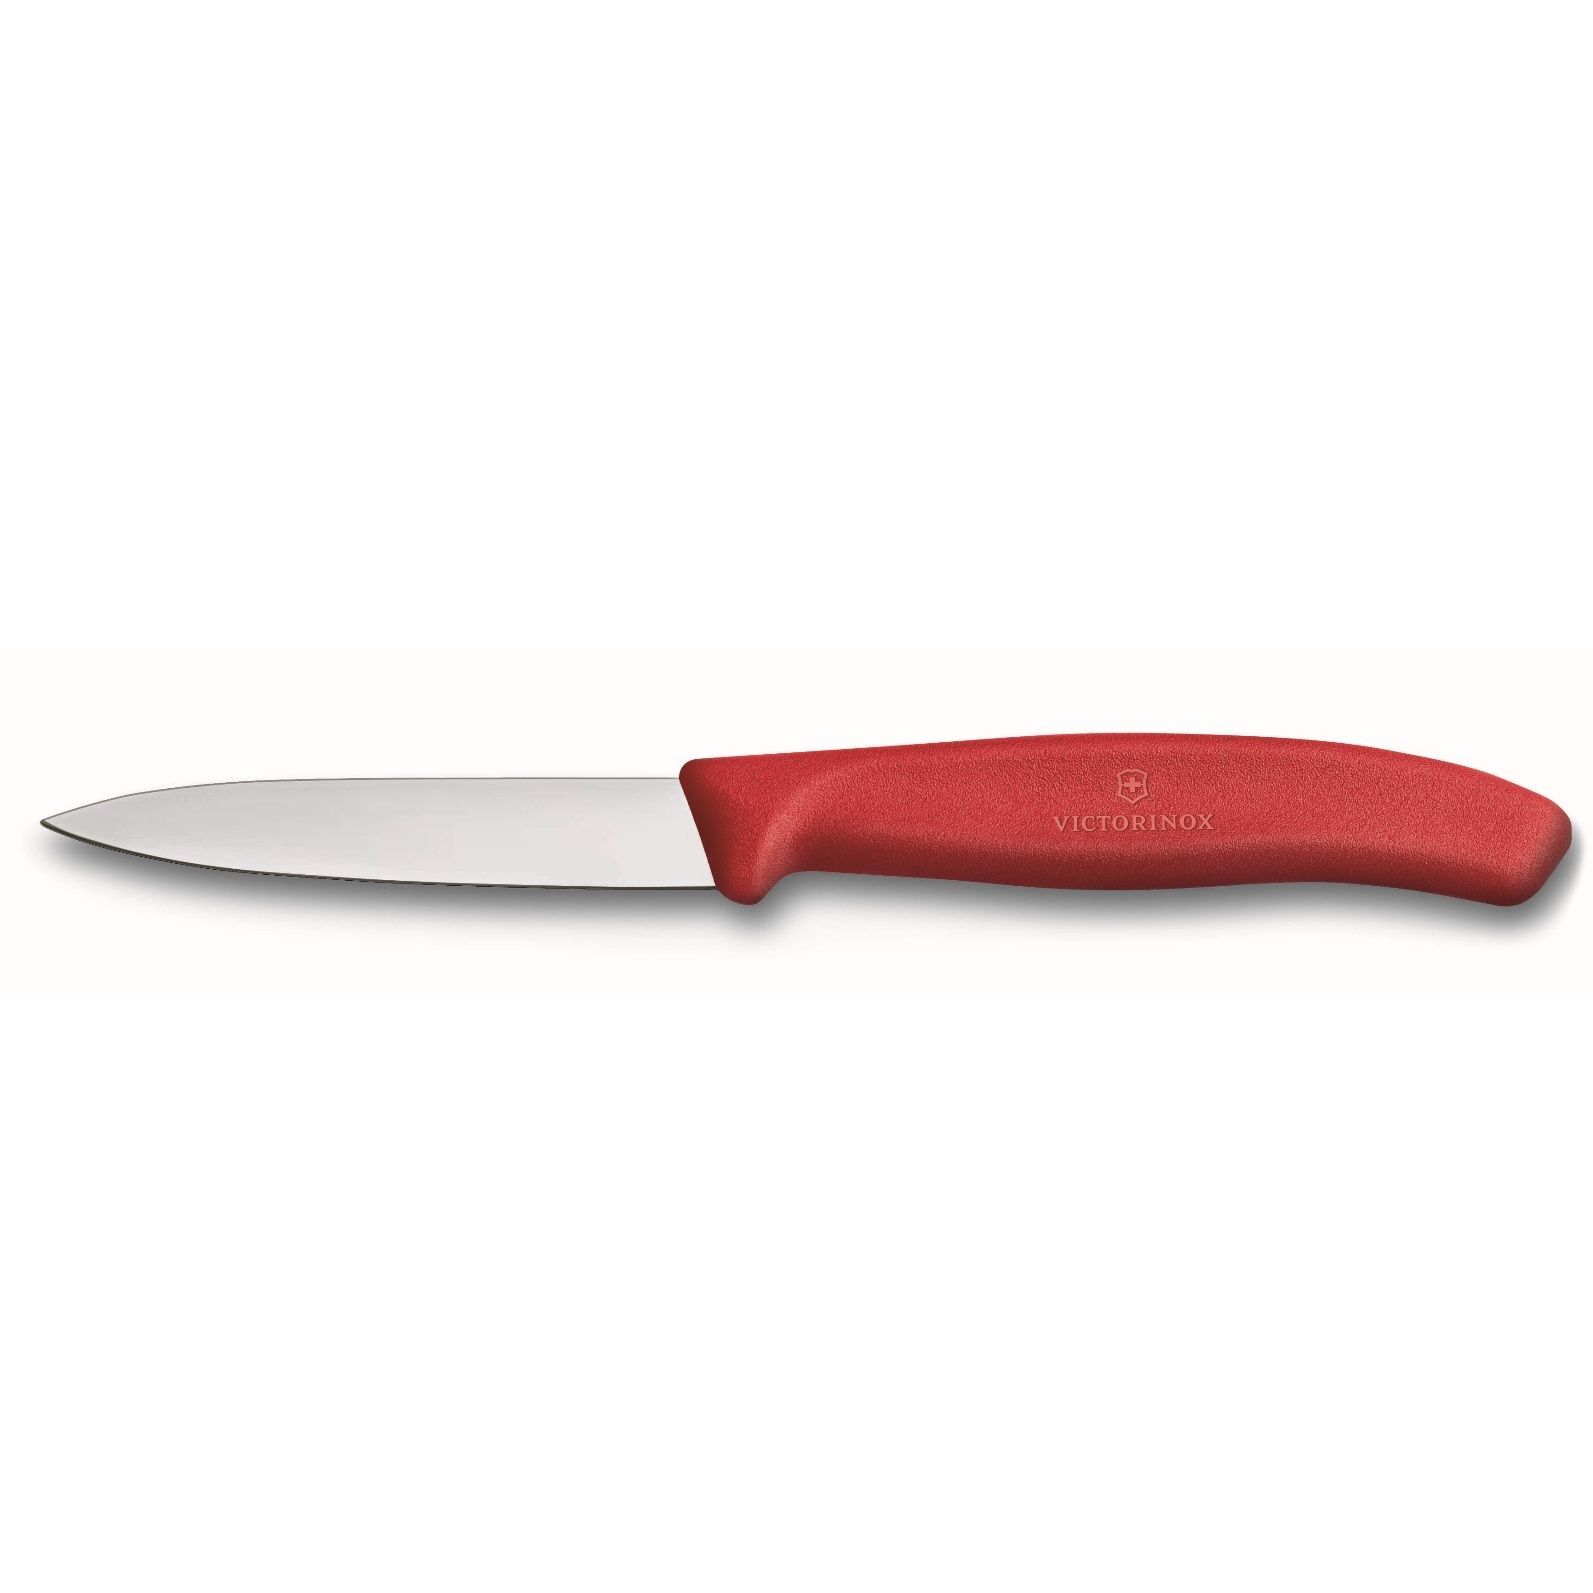 Victorinox Paring Knife Pointed Tip Straight Blade 8cm